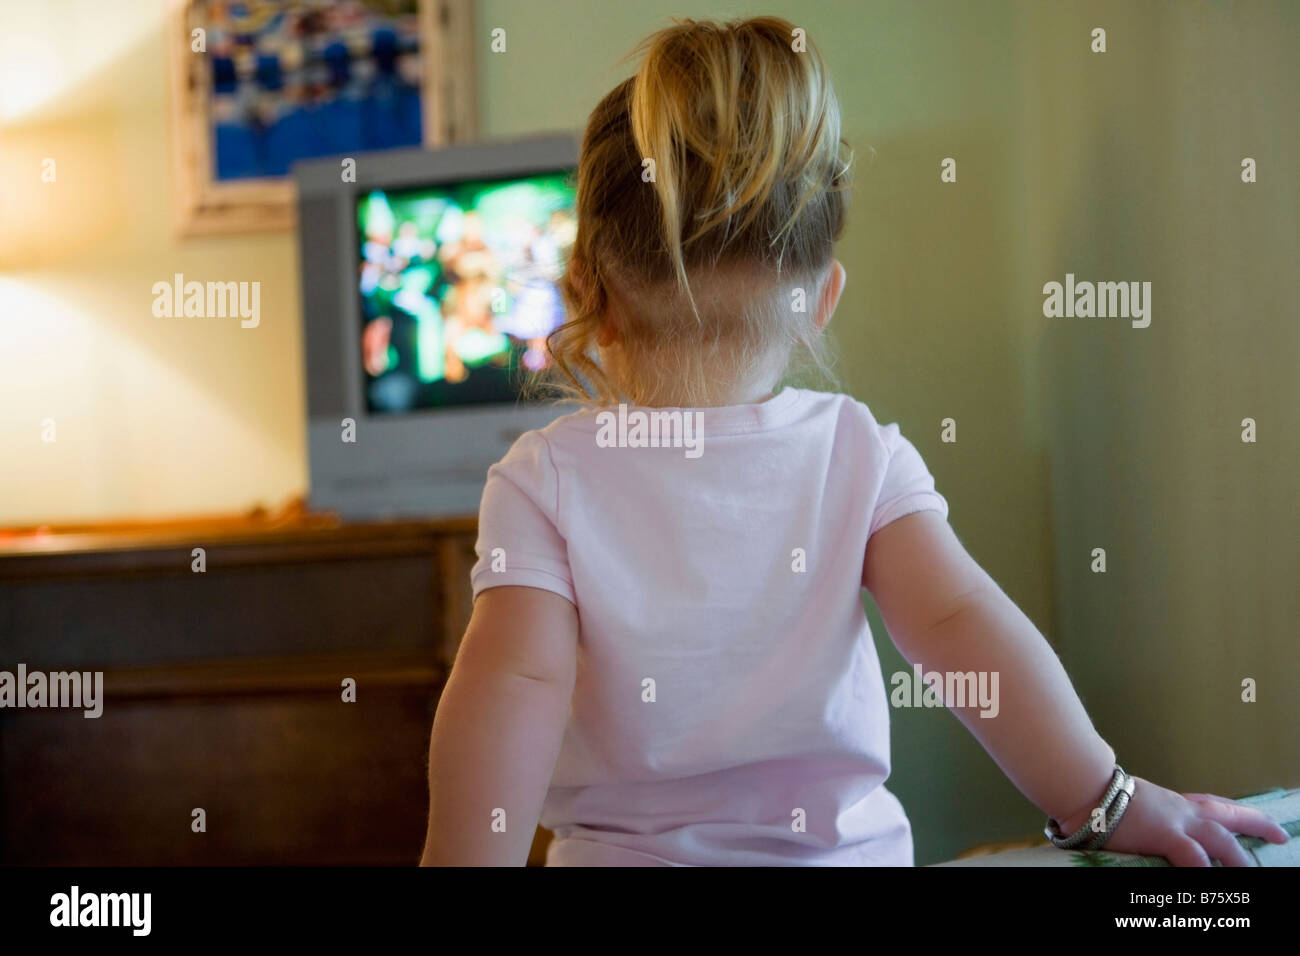 Rear view of a baby girl watching television Stock Photo